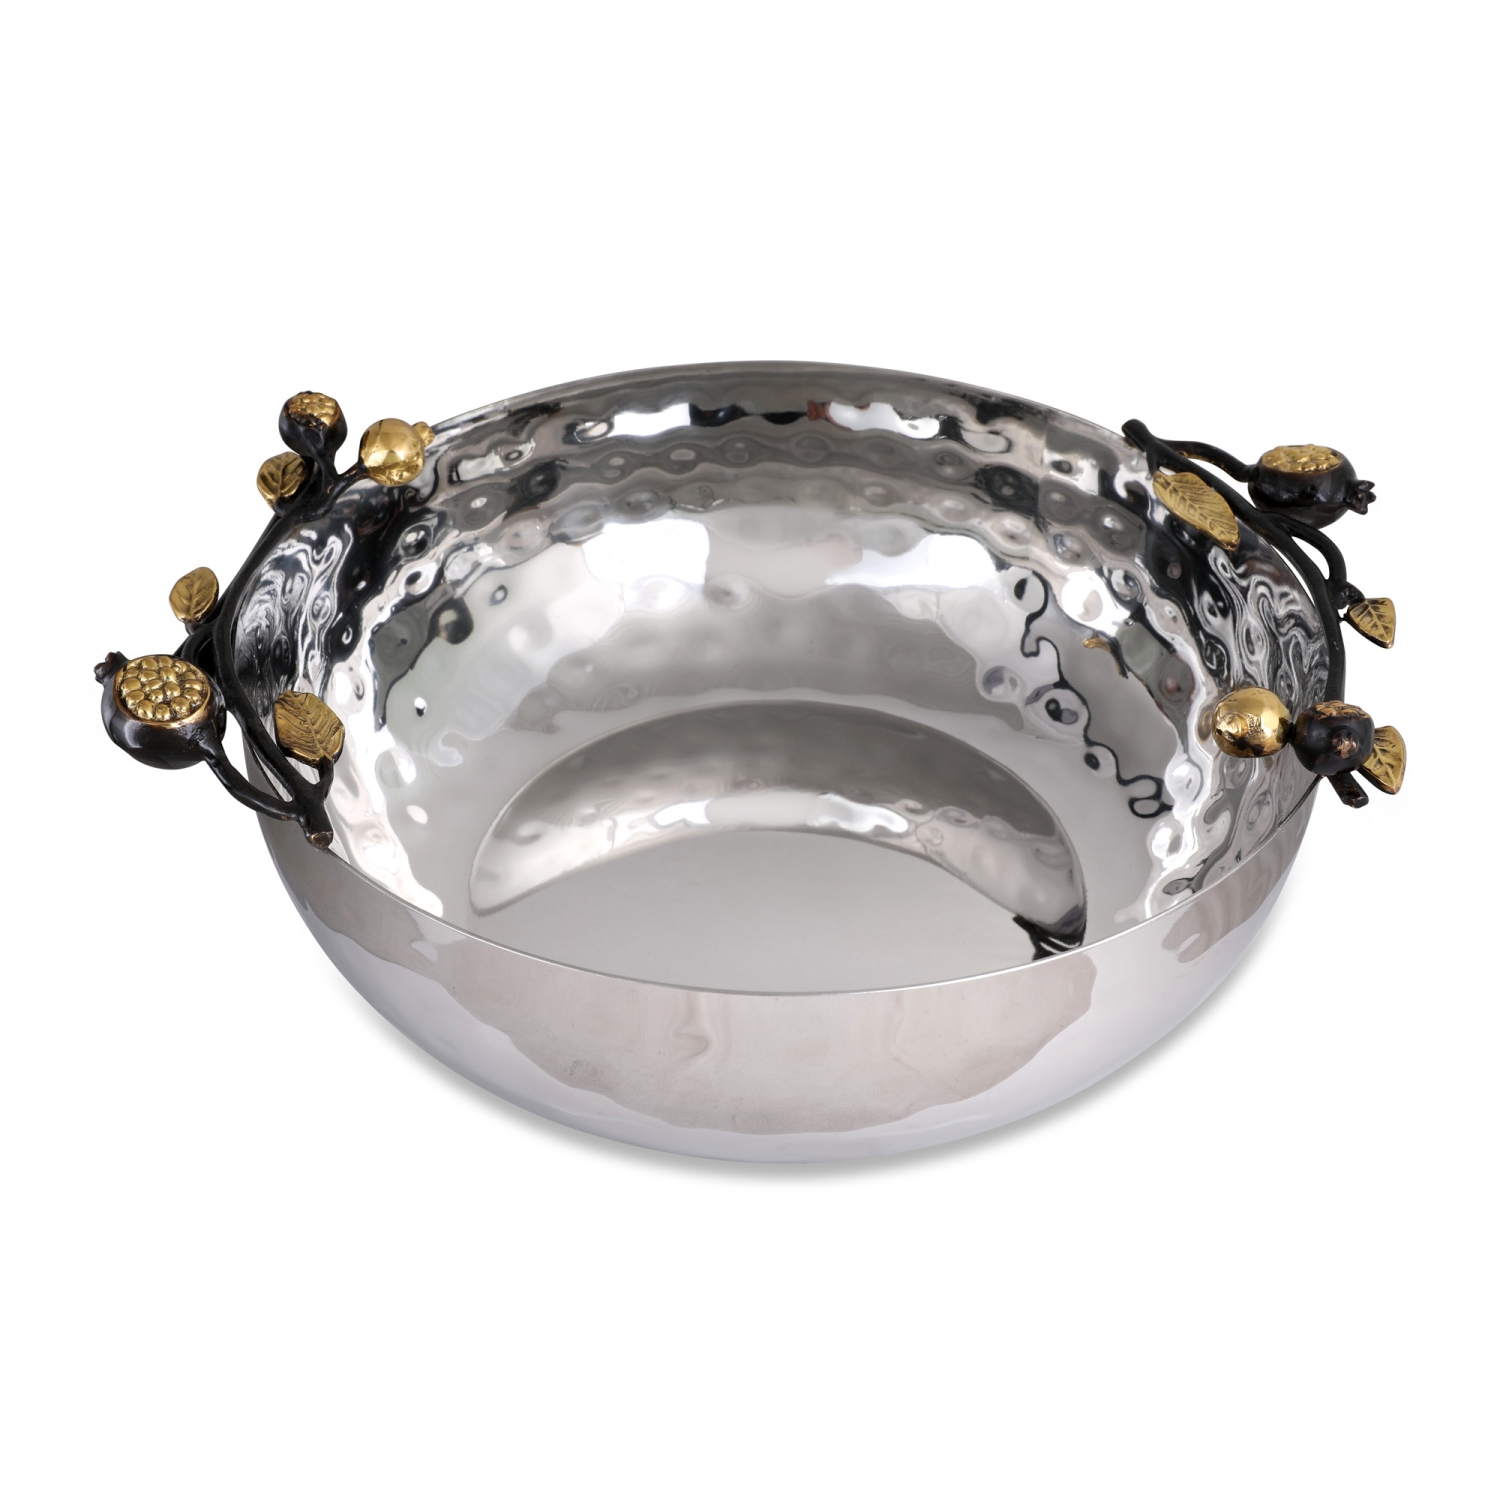 Yair Emanuel Large Stainless Steel Pomegranate Bowl  - 1